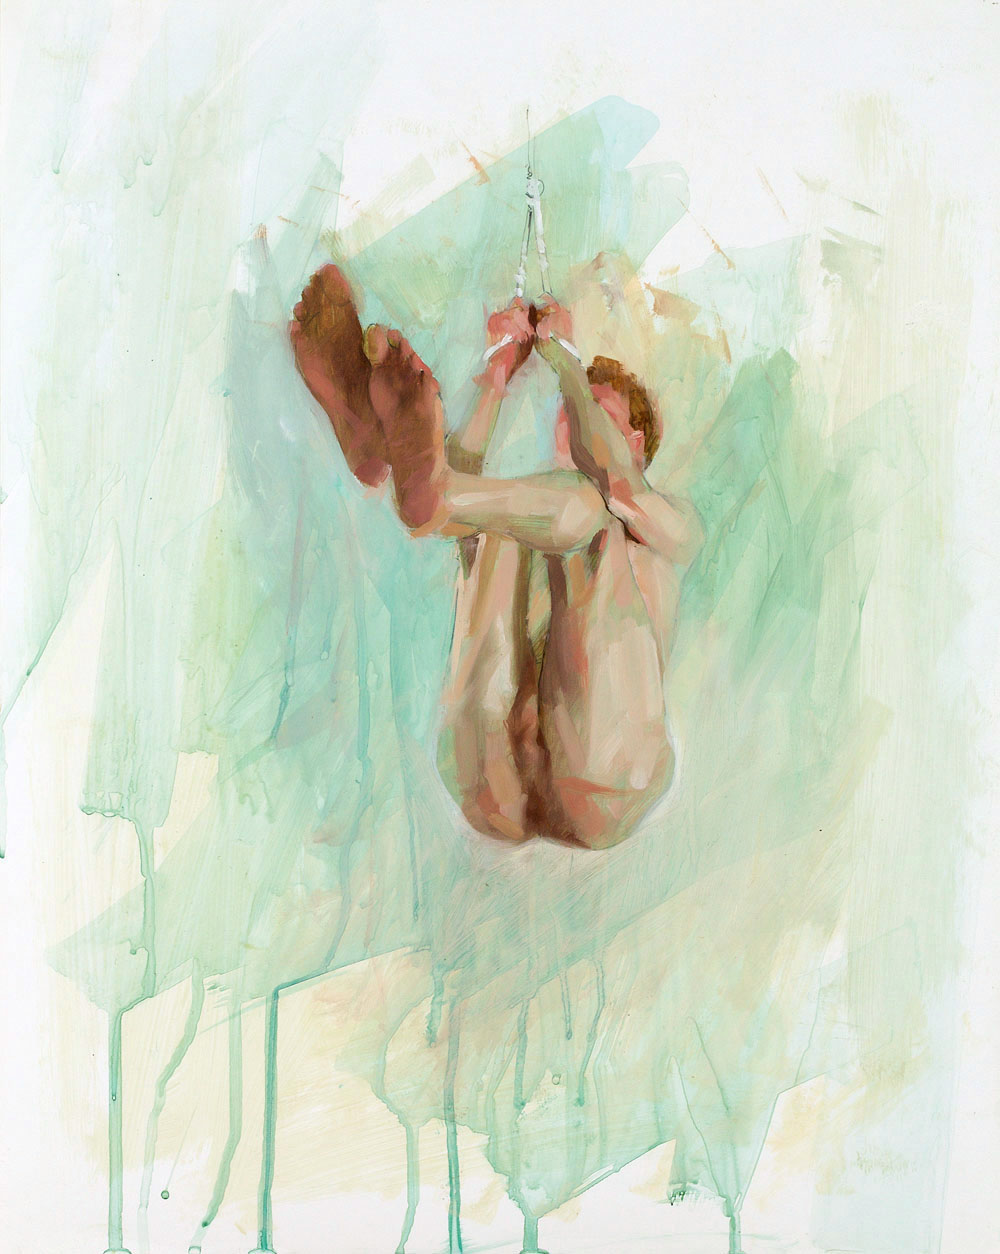   Hang Study No. 2   20 x 16 inches  oil on TerraSkin    